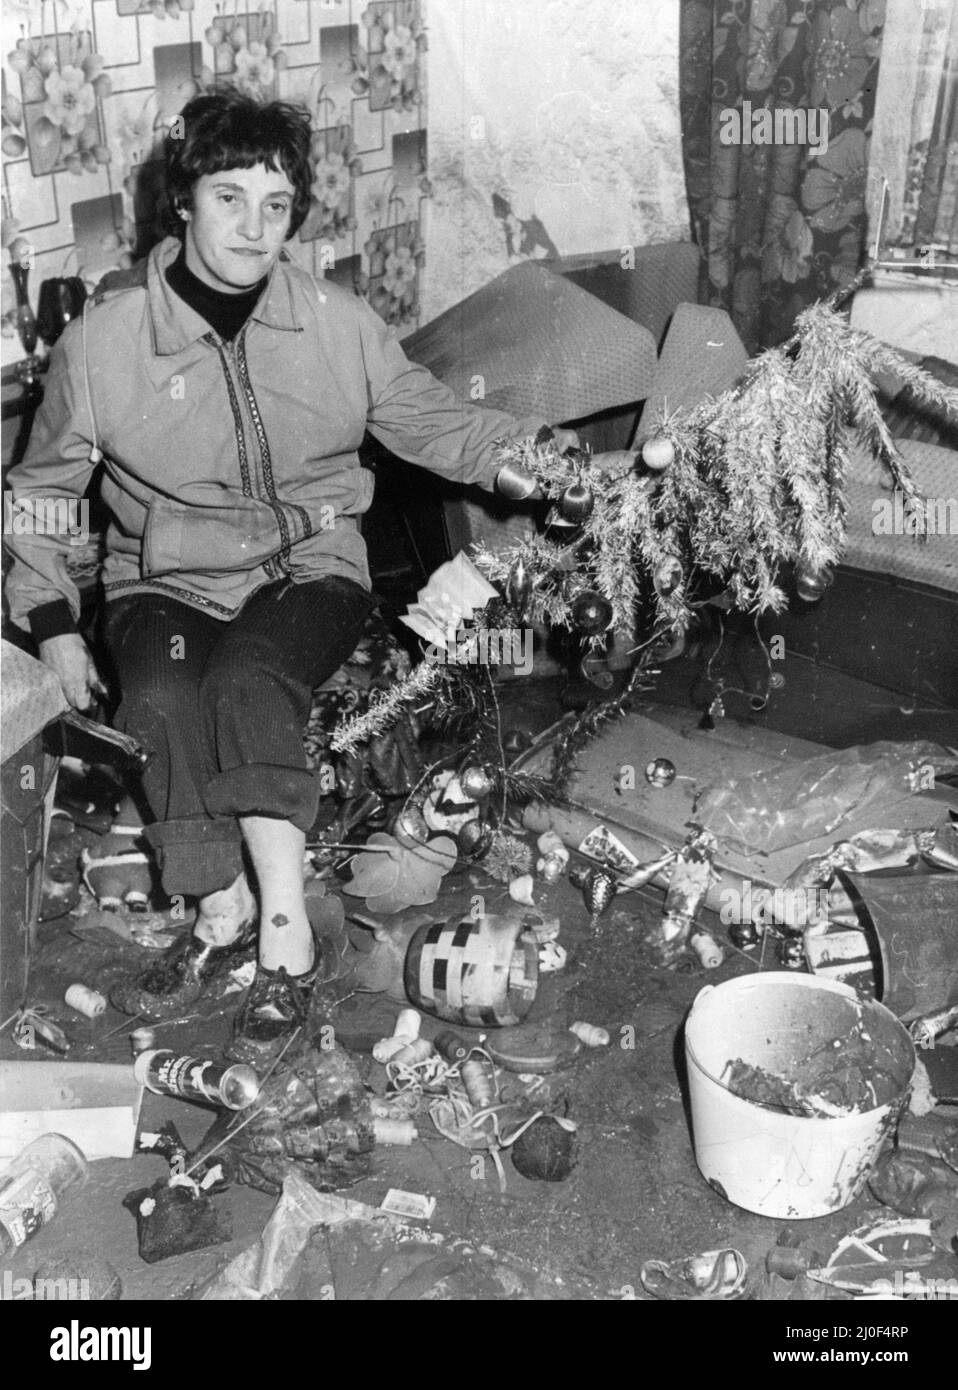 Welsh Floods 1979, Our picture shows ... The aftermath of Christmas, Mrs Mary Milton clears up in the damaged front room of her home in Trehafod, 27th December 1979. Stock Photo